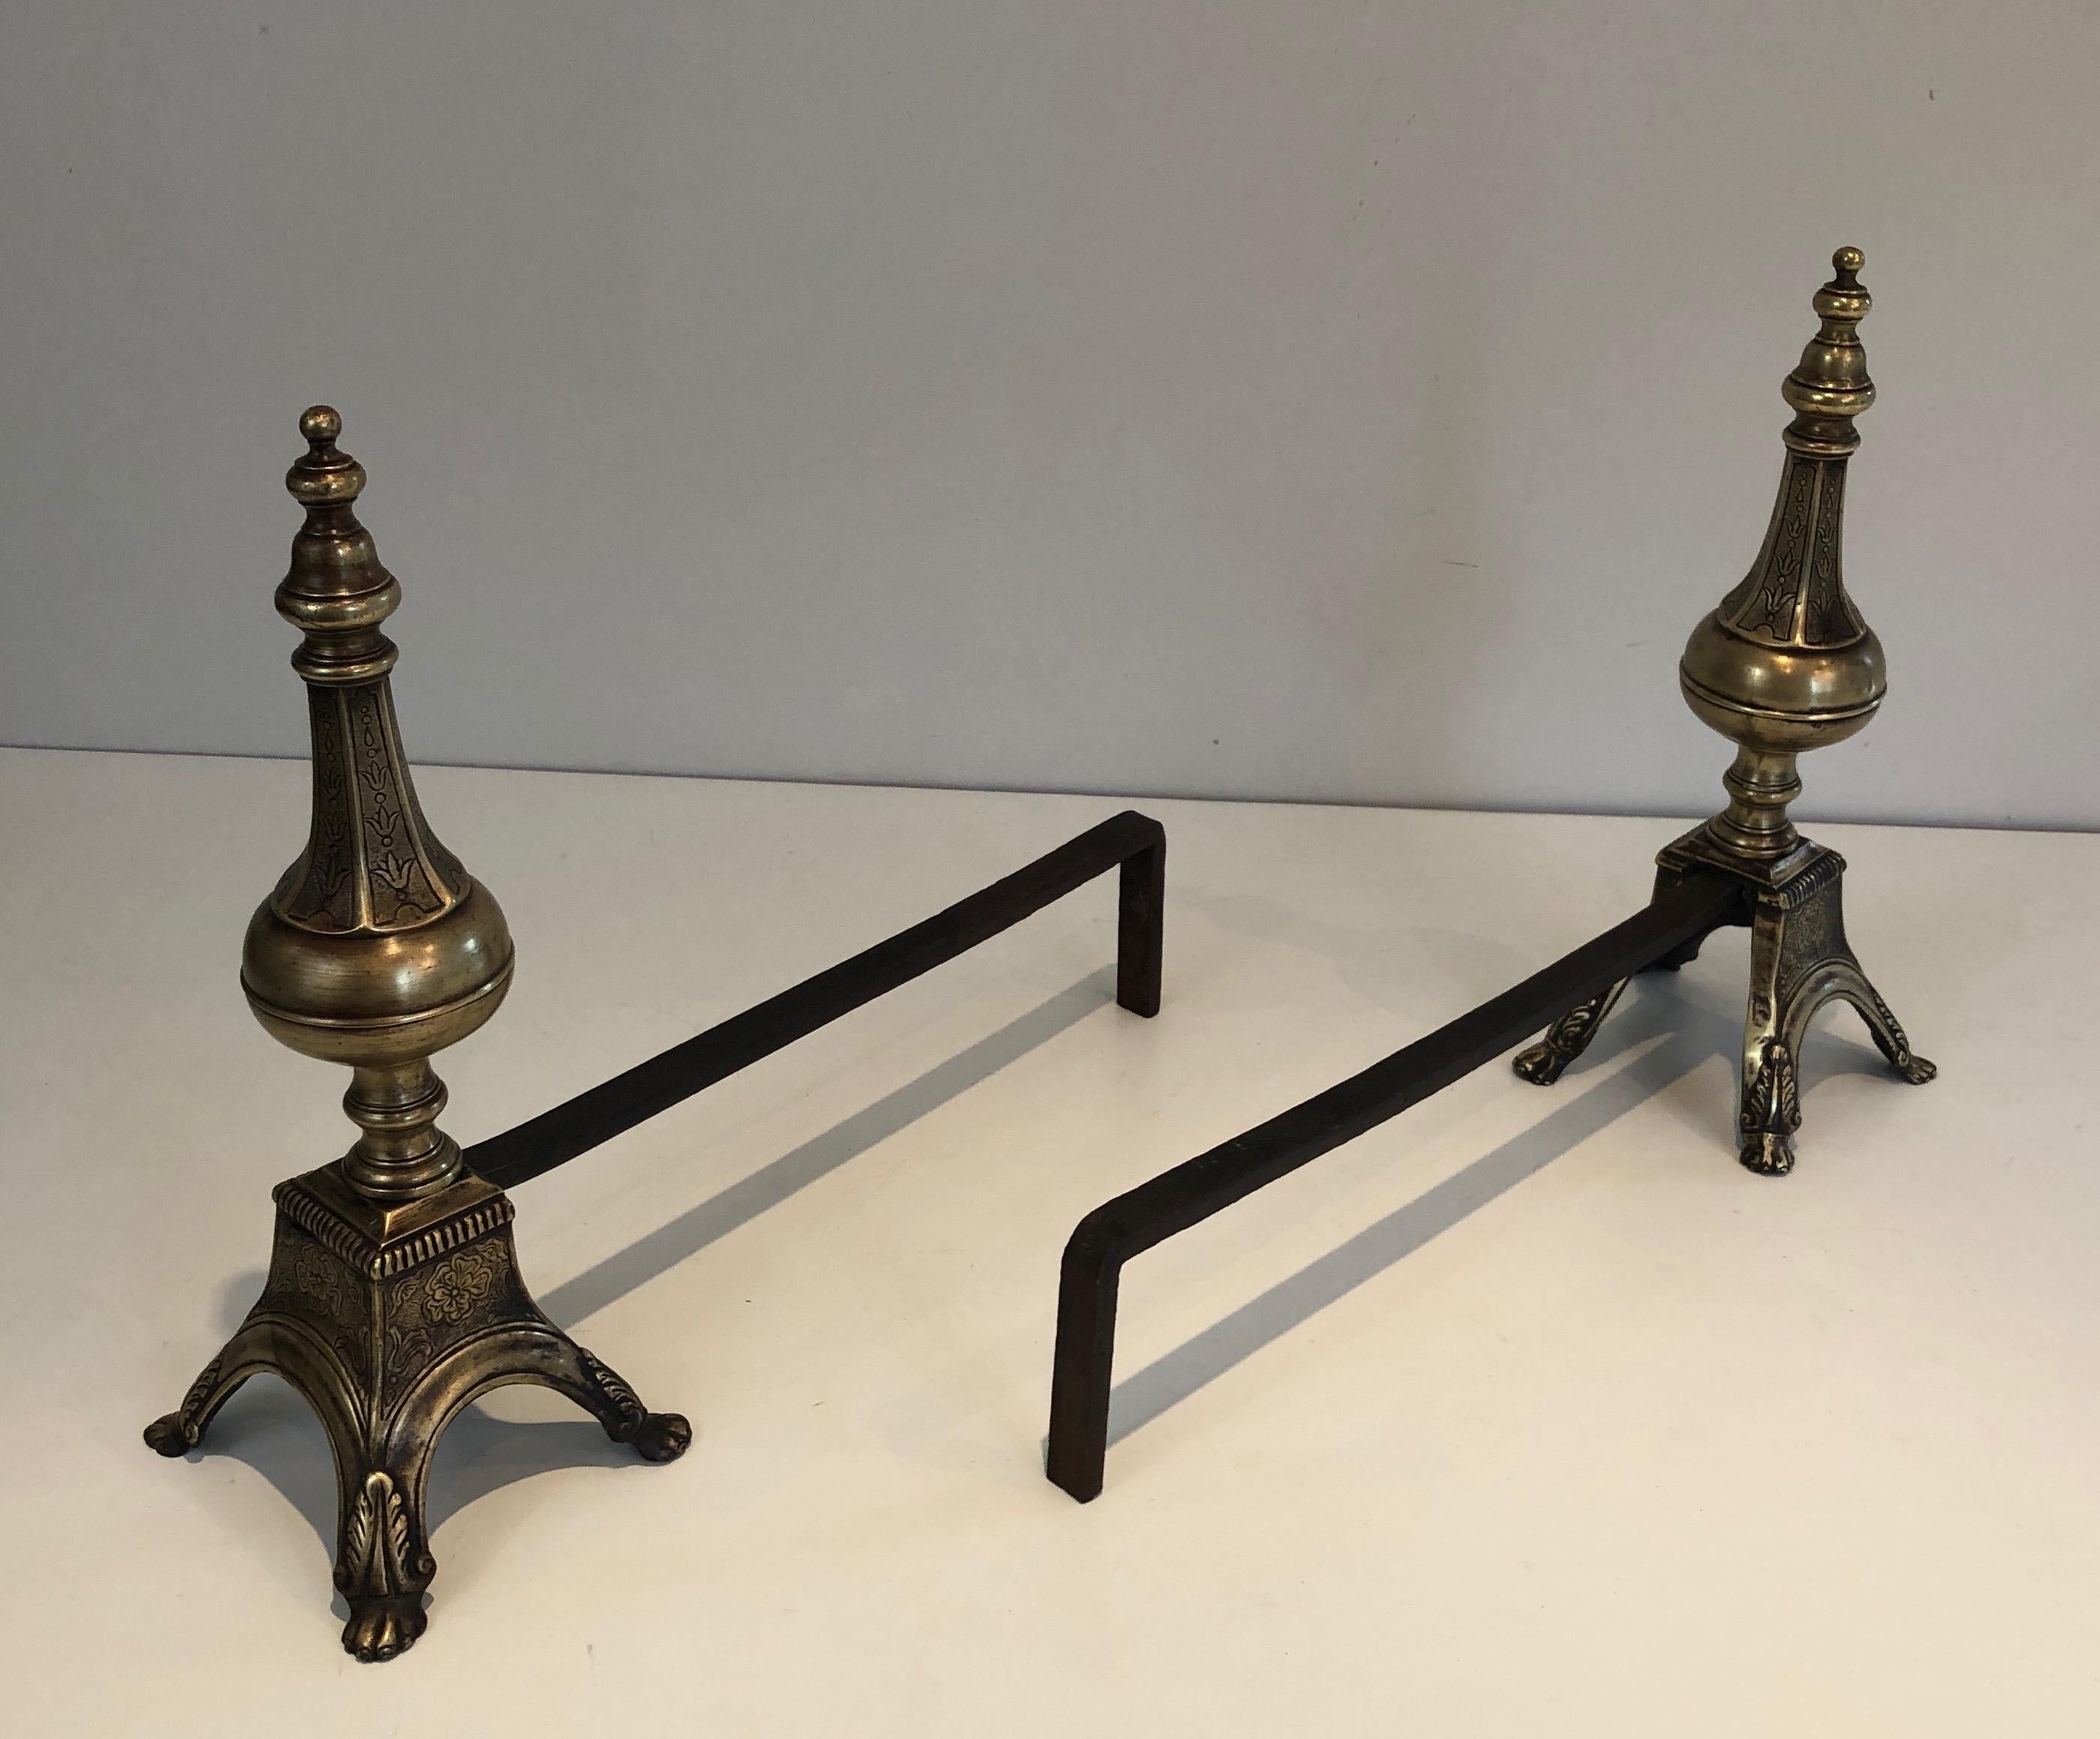 Rare Pair of Louis the 16th Style Bronze & Wrought Iron Andirons, 19th Century For Sale 6